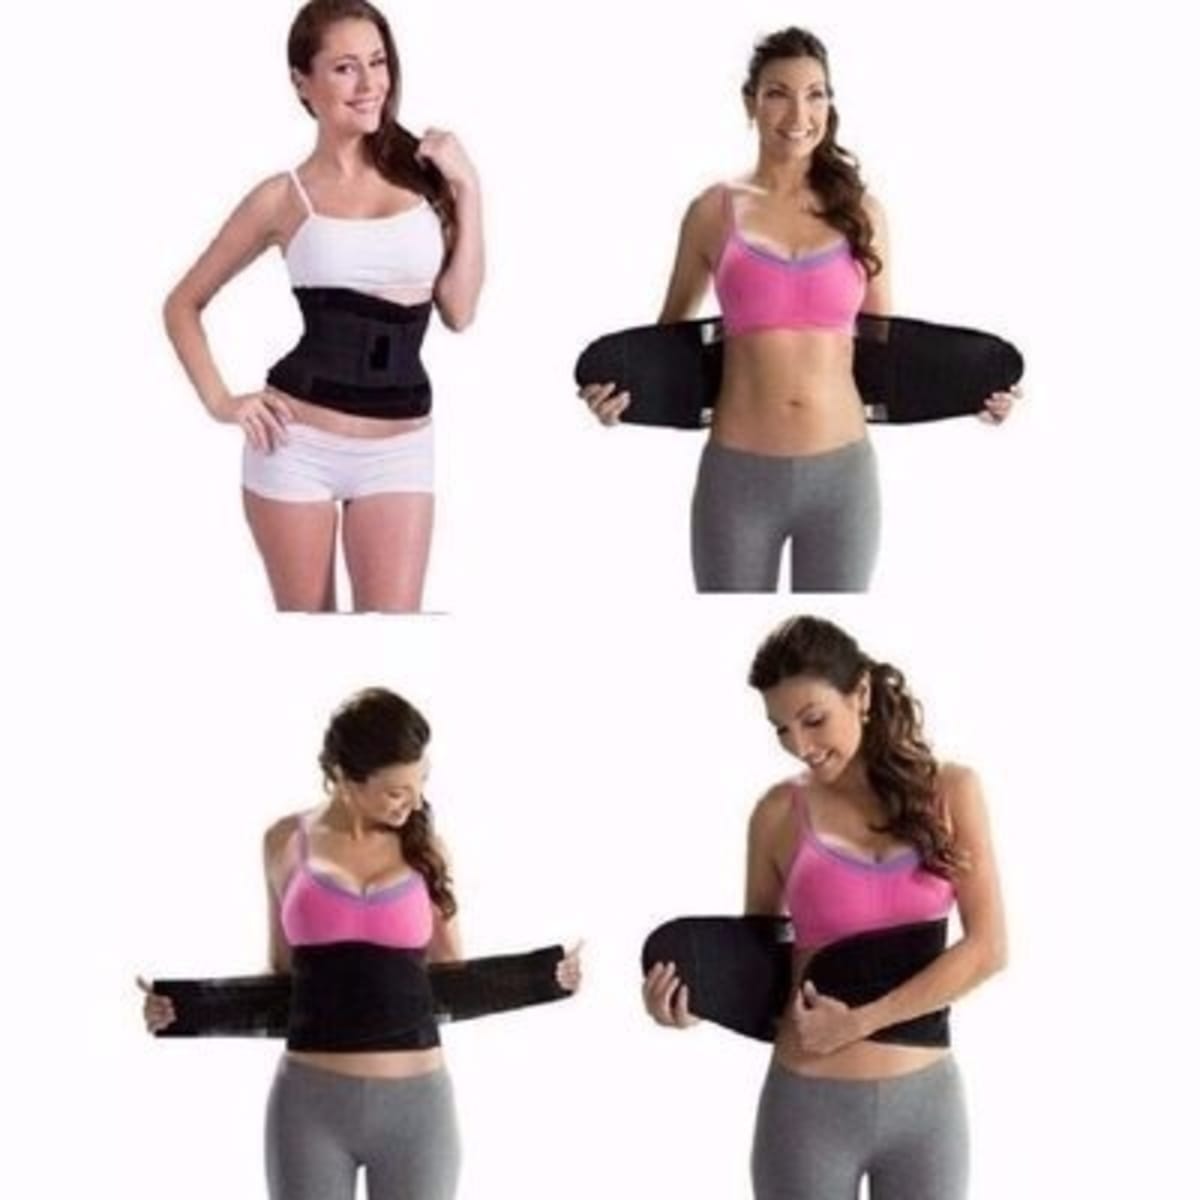 Buy CONNECTWIDE Hot Sweating Body Shapers Slimming Pants Knee Yoga Exercise  Wonder Tummy Trimmer Thigh Womens Capri Hot Body Slimming Shapper Pant   Lowest price in India GlowRoad